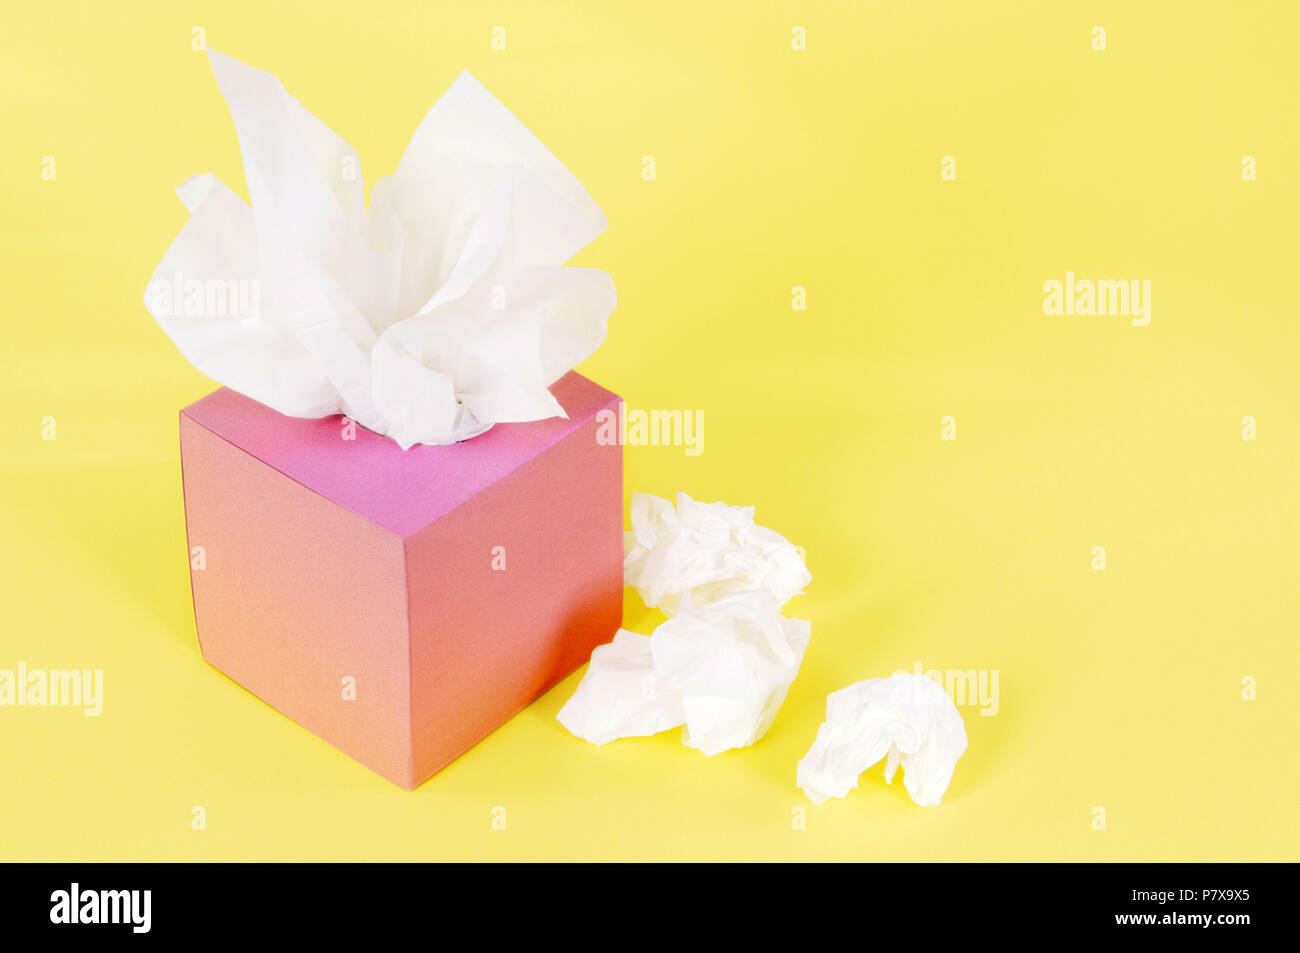 Paper tissues in blank pink box on a yellow background. Stock Photo